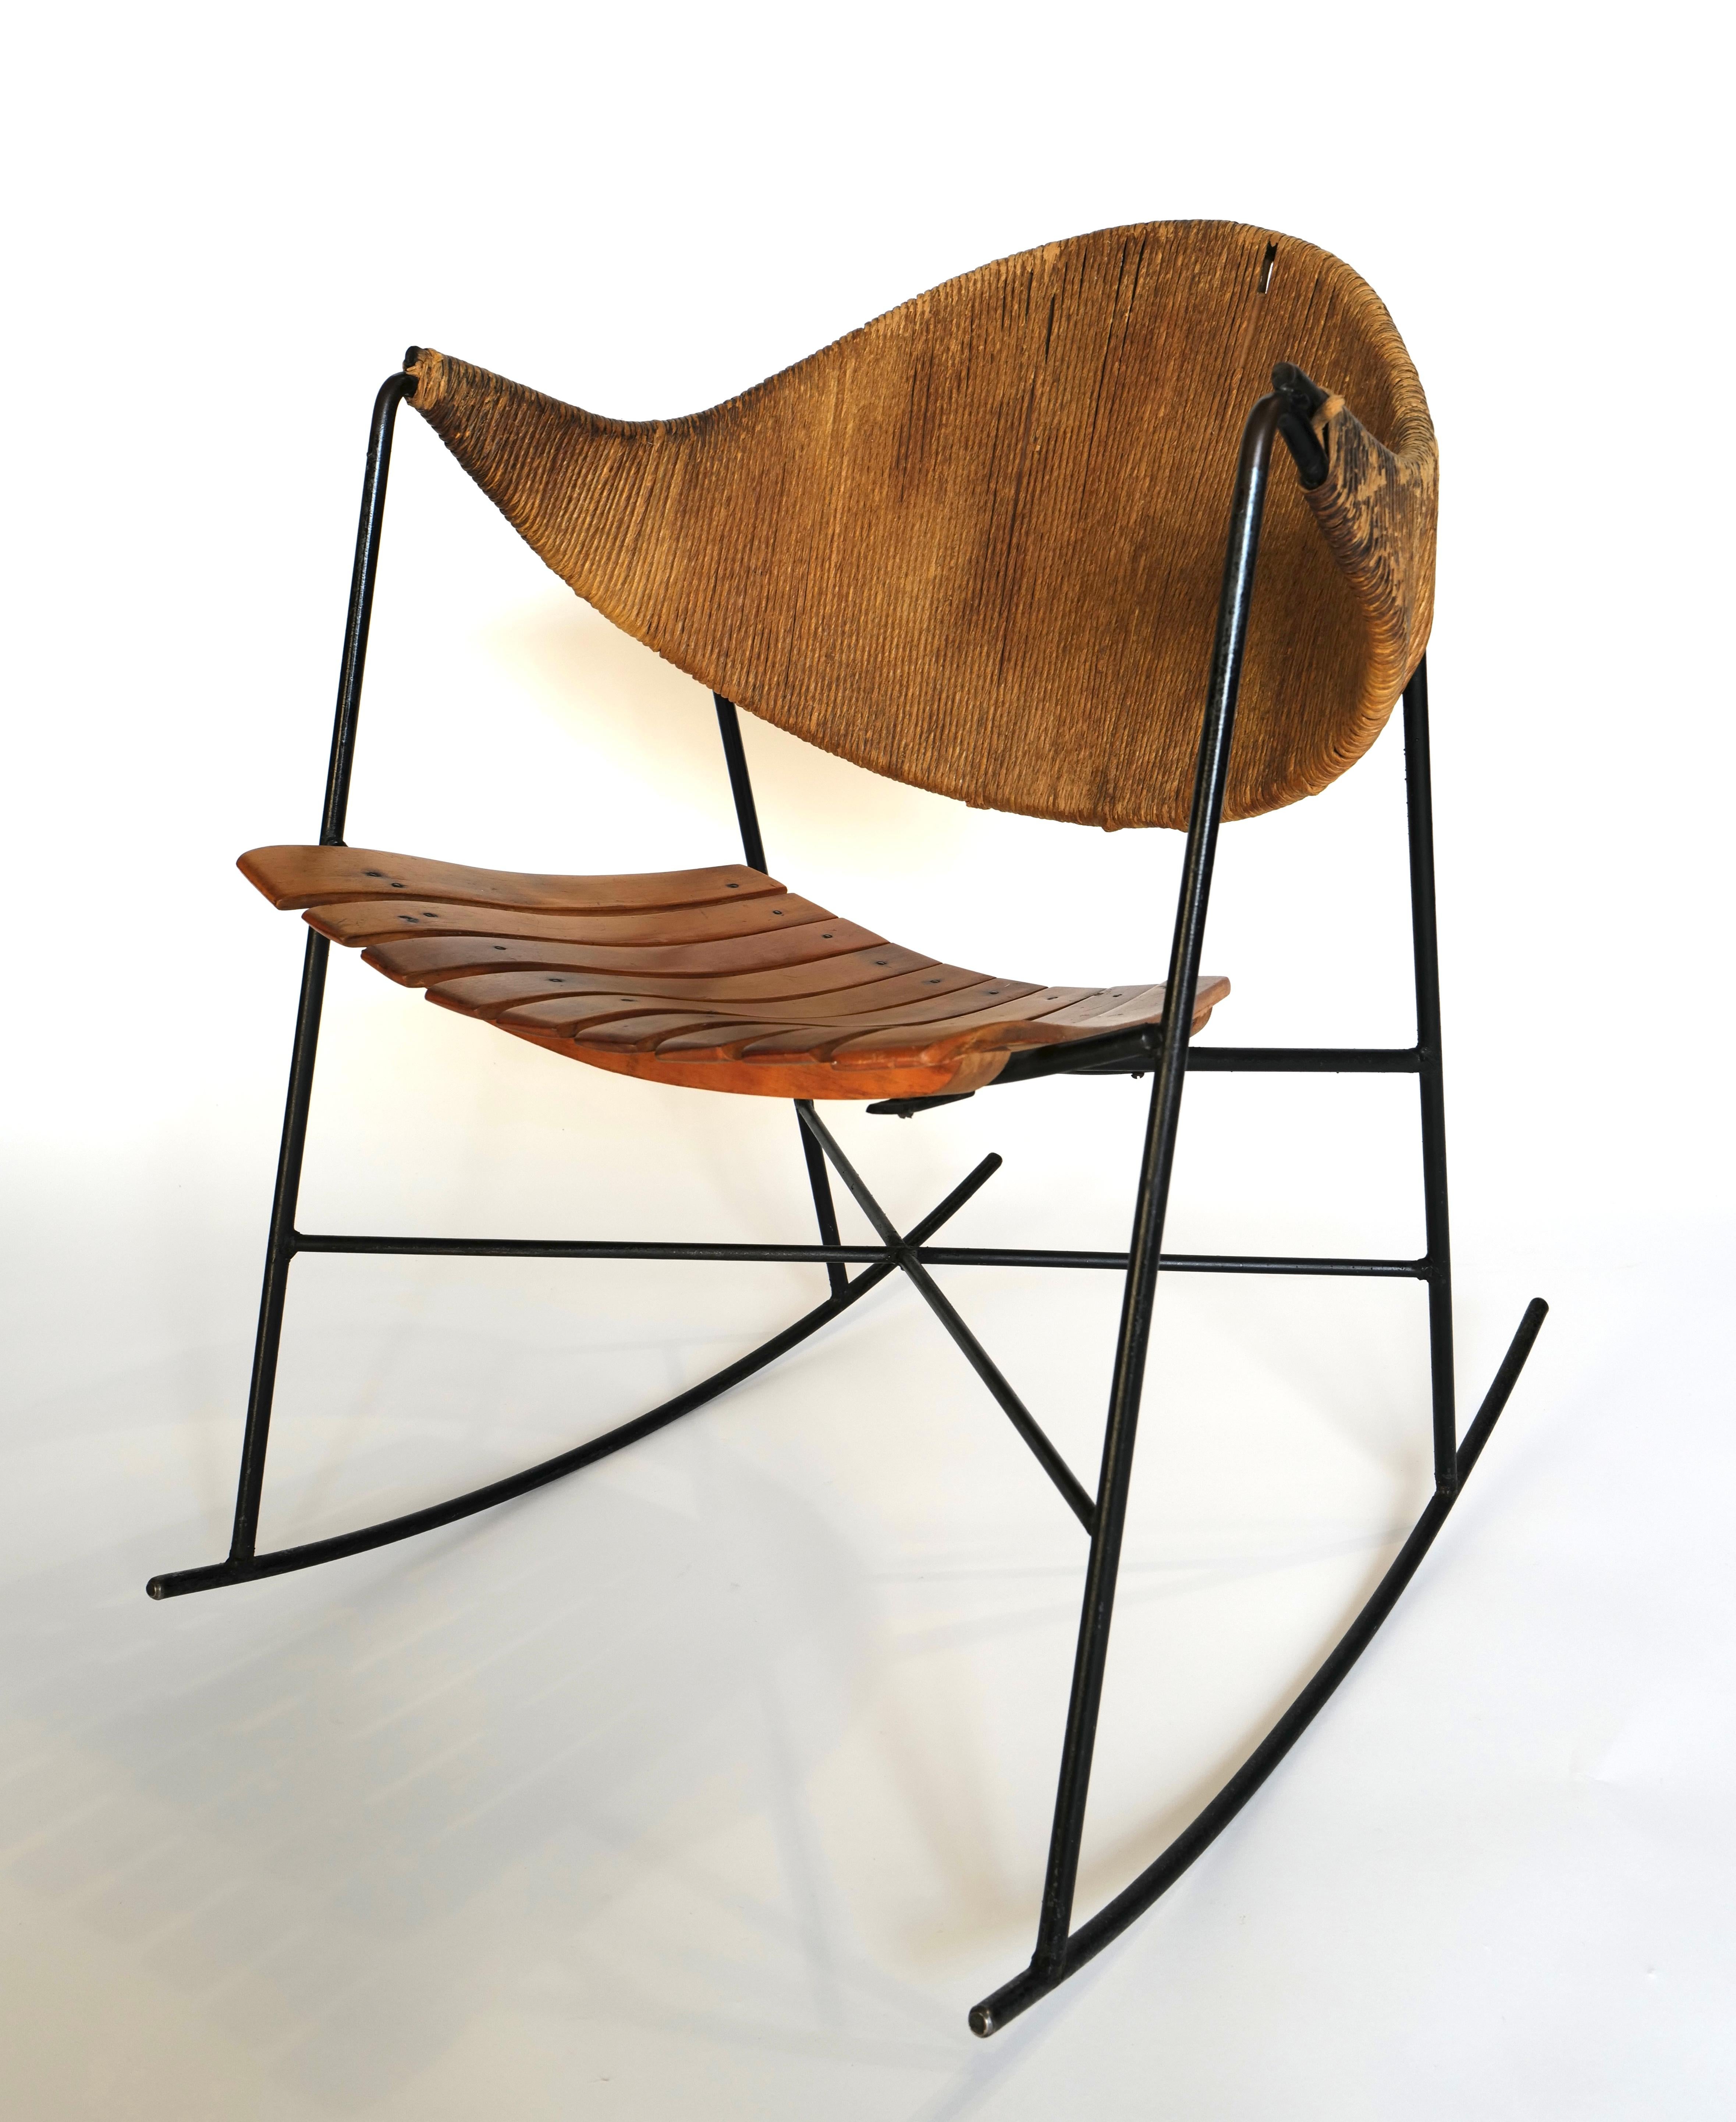 The Arthur Umanoff rocking chair is a timeless piece of furniture that combines elegant design with exceptional comfort. Designed by Arthur Umanoff, a prominent mid-century modern furniture designer, this rocking chair showcases his signature style